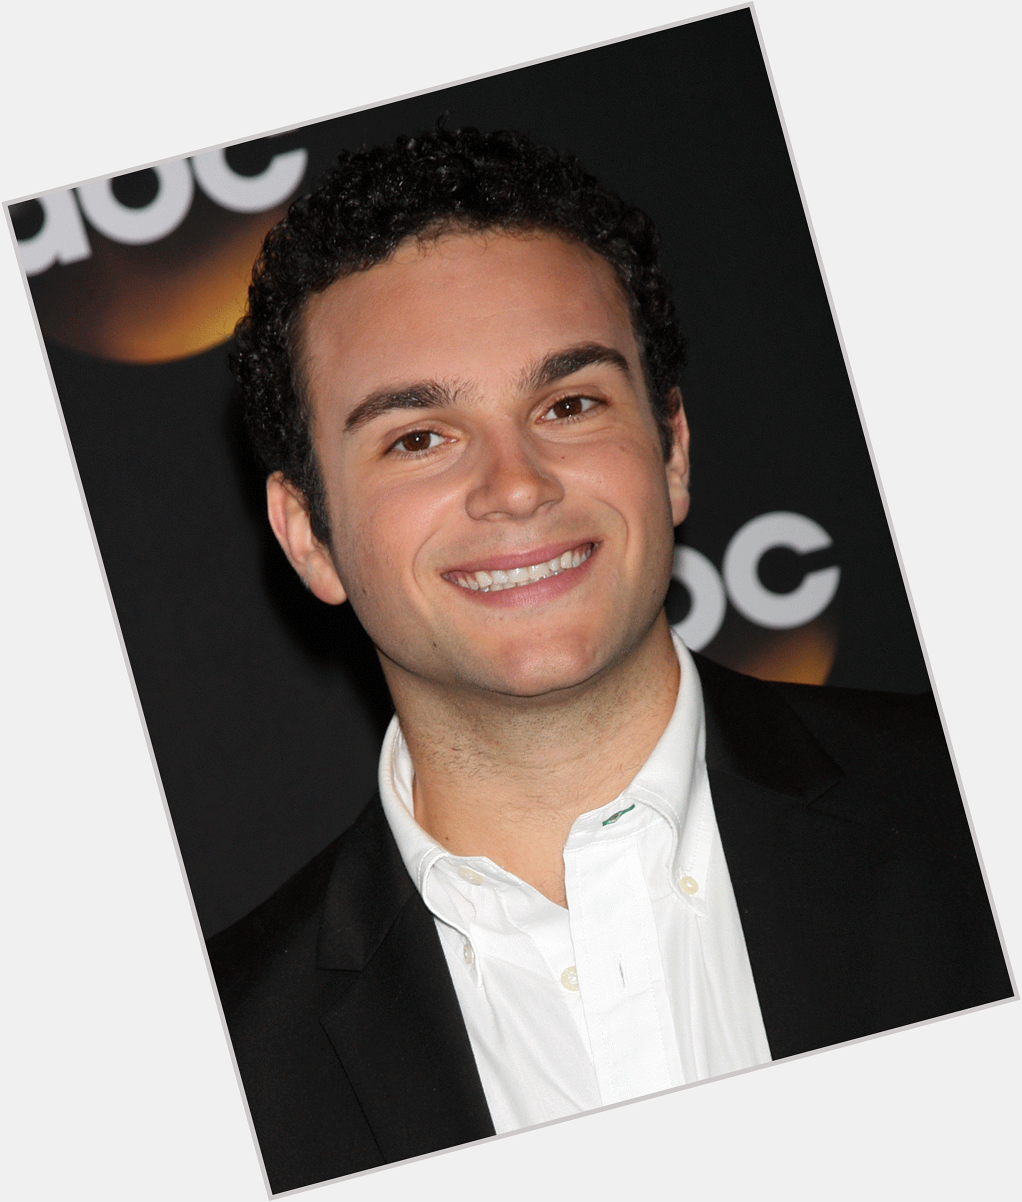 Happy 28th birthday to (Troy Gentile)! The actor who played Barry Goldberg from The Goldbergs. 